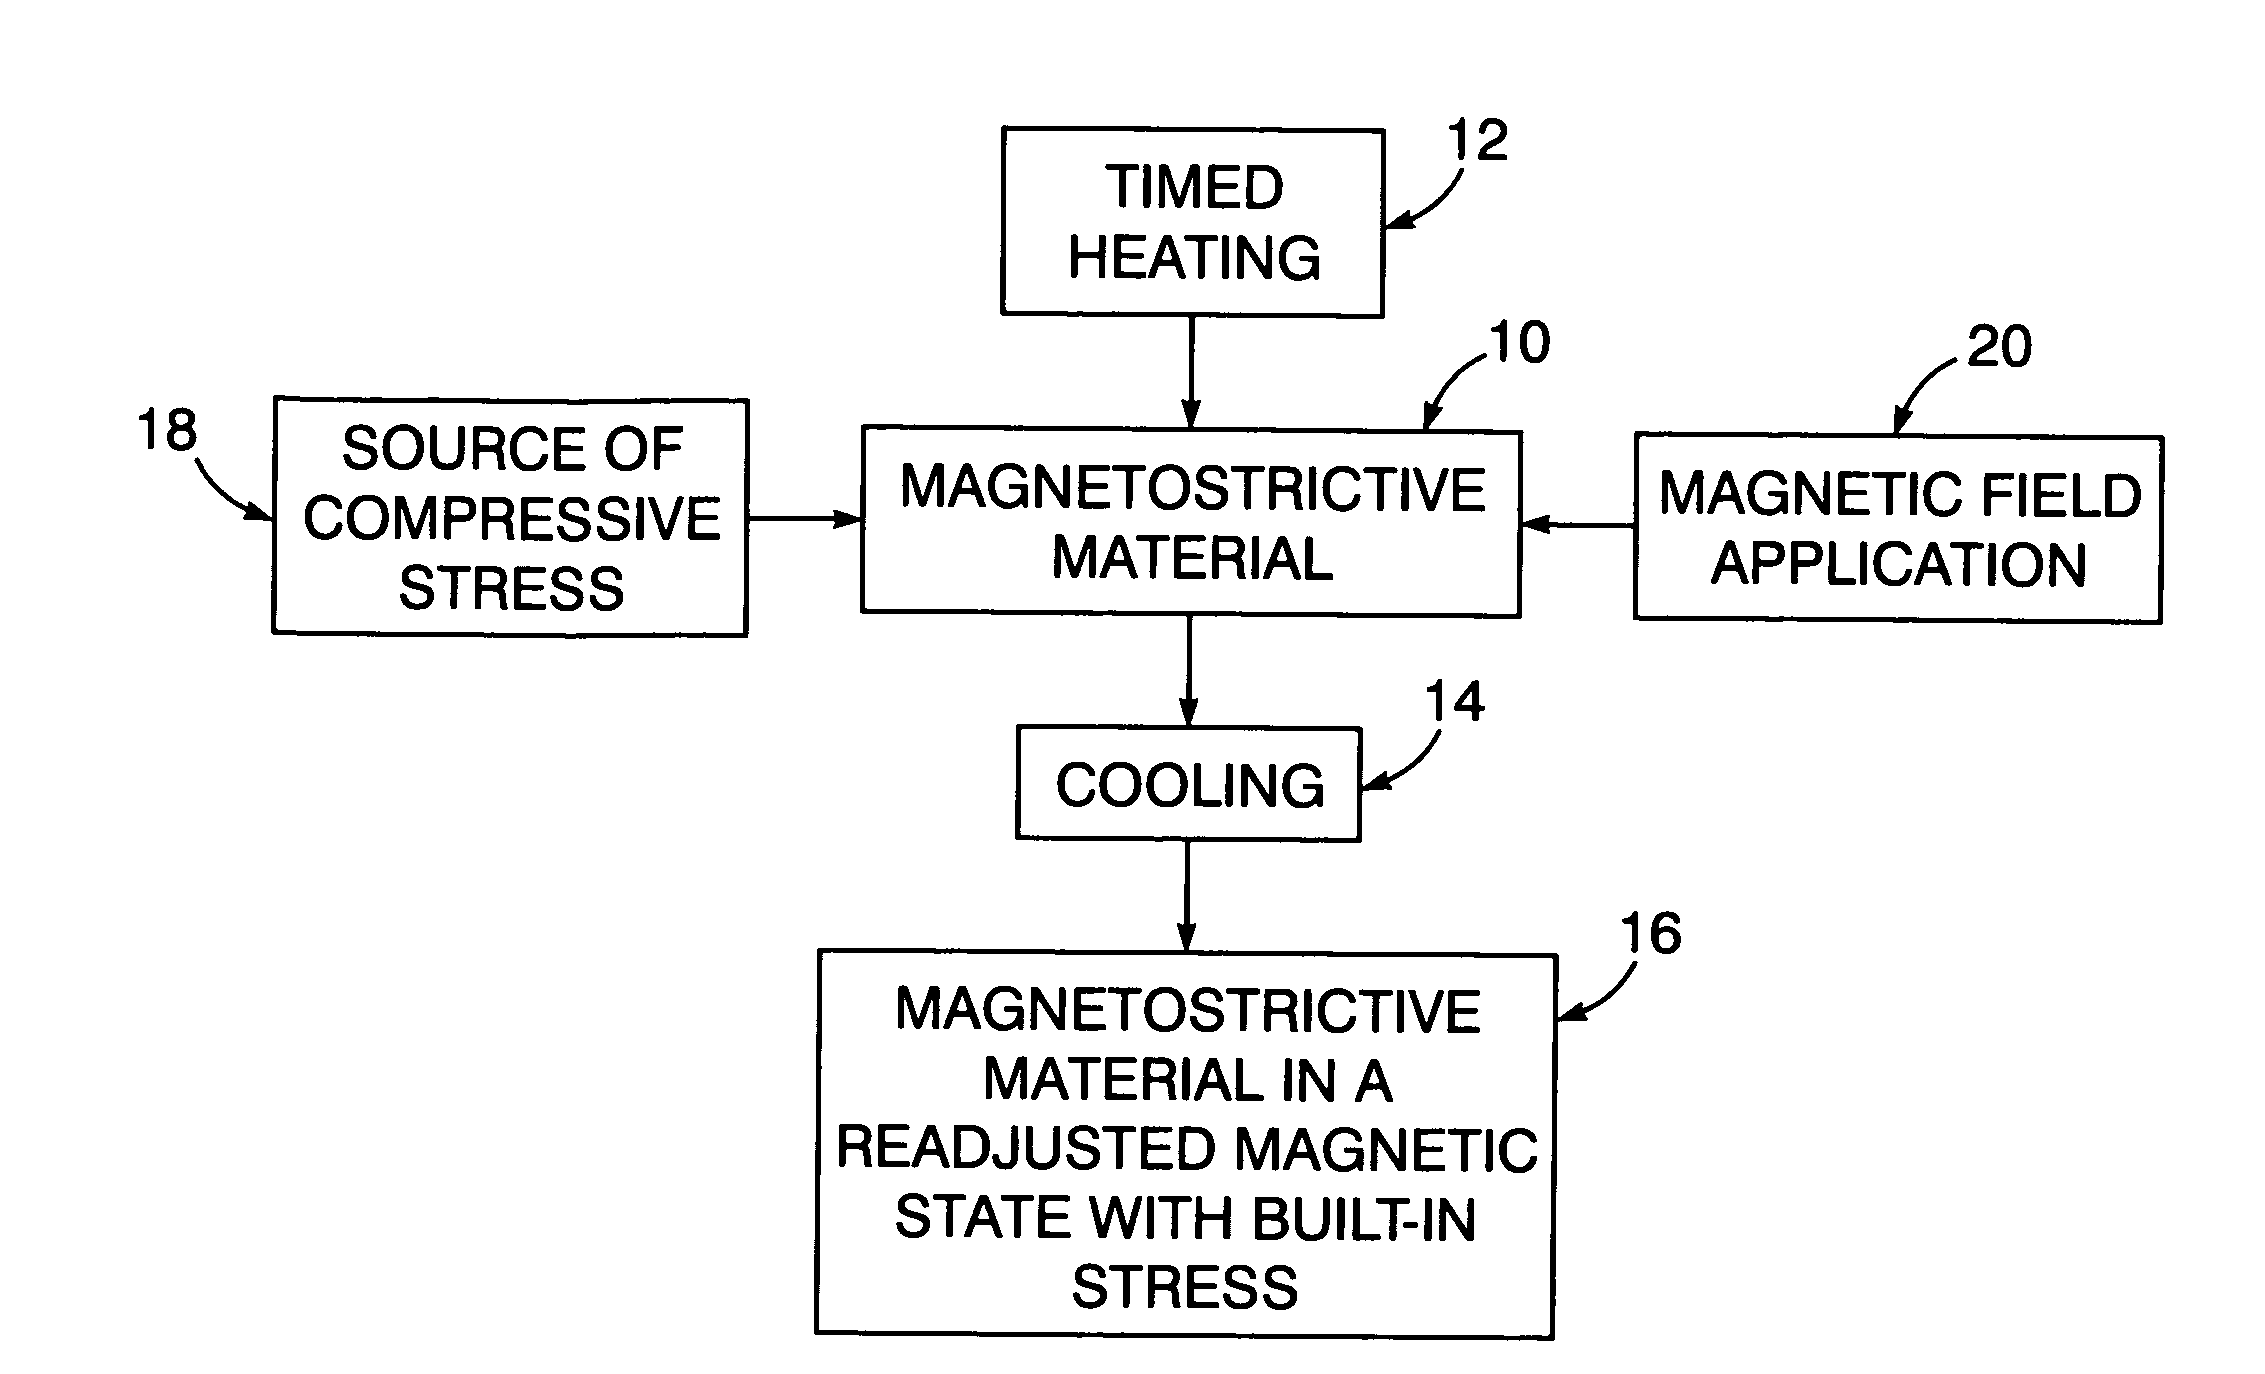 Preparation of positive magnetostrictive materials for use under tension